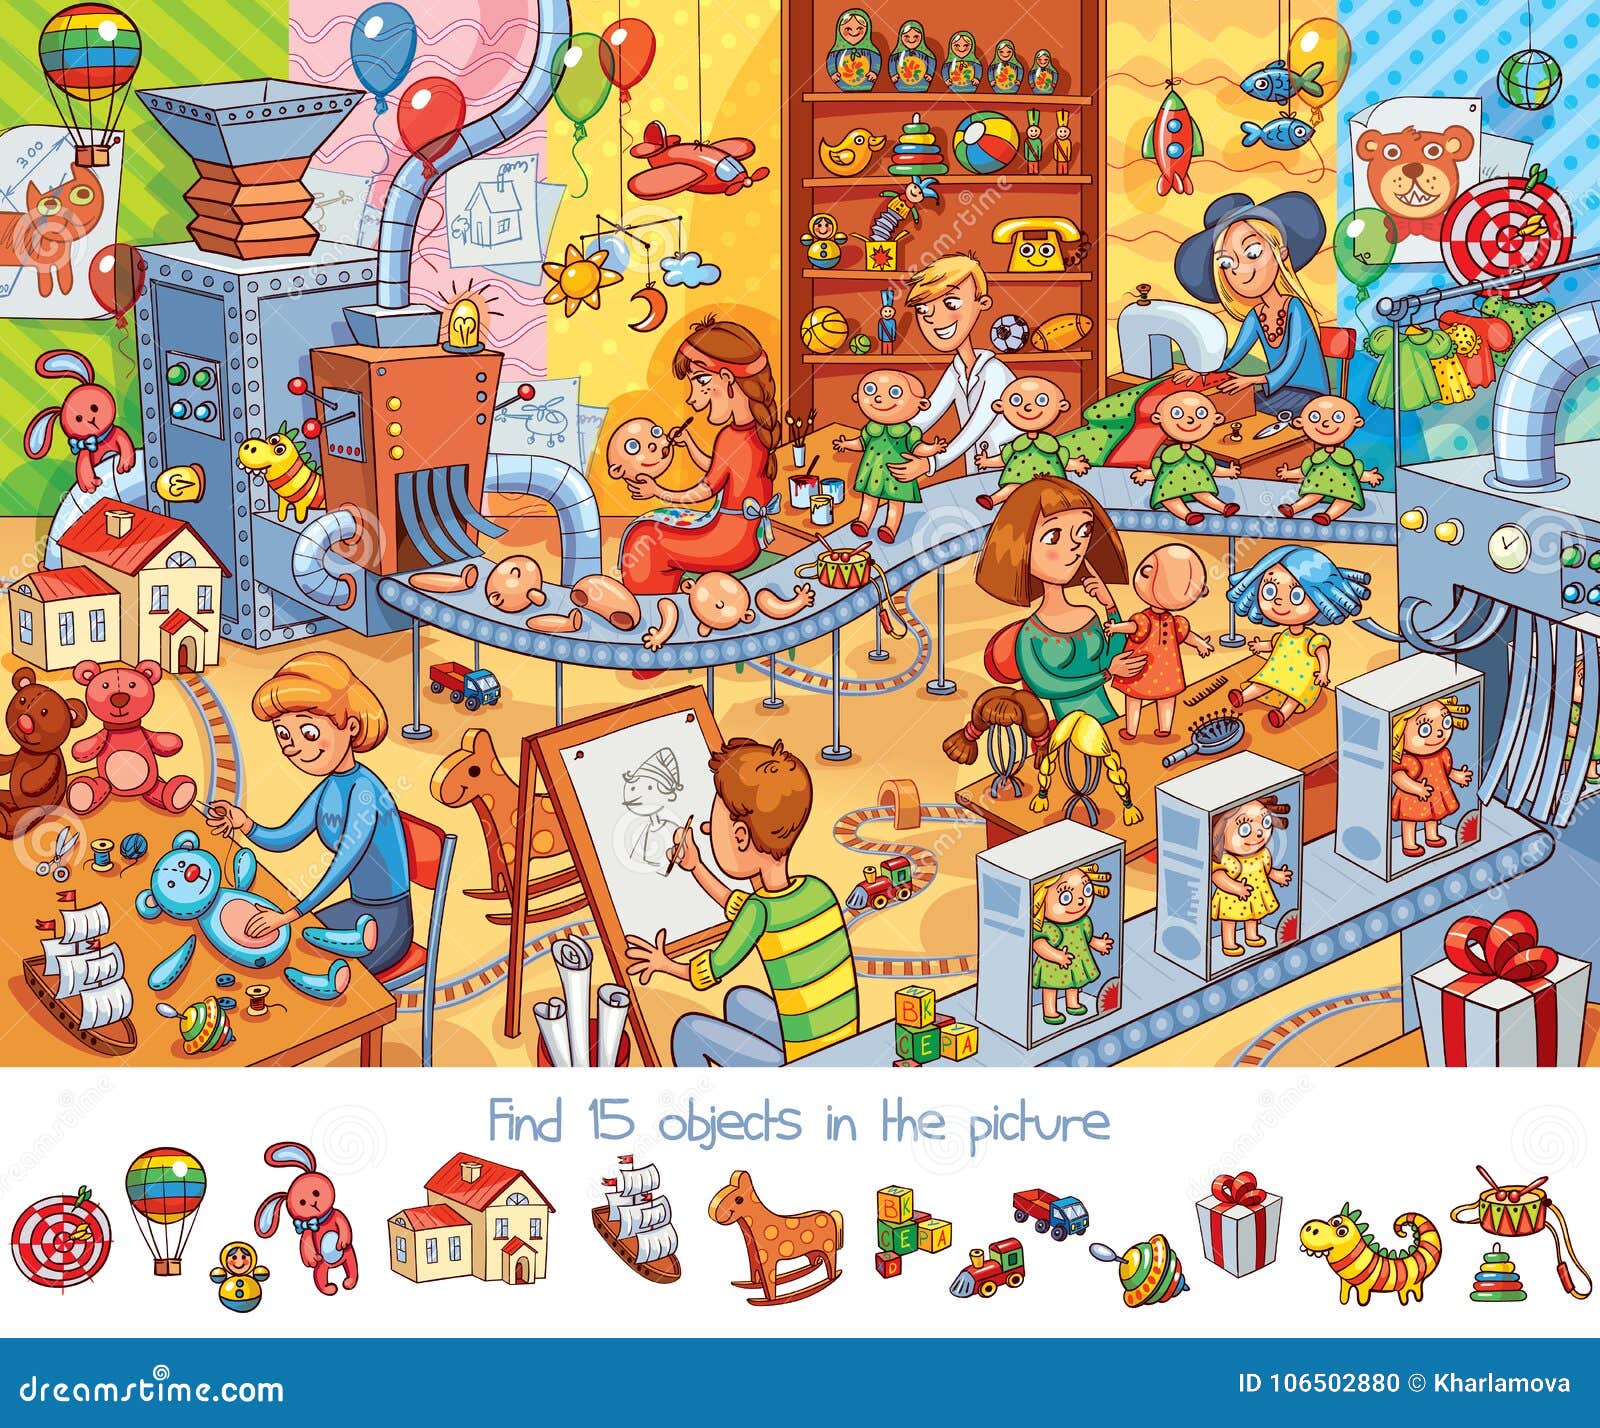 toy factory. find 15 objects in the picture